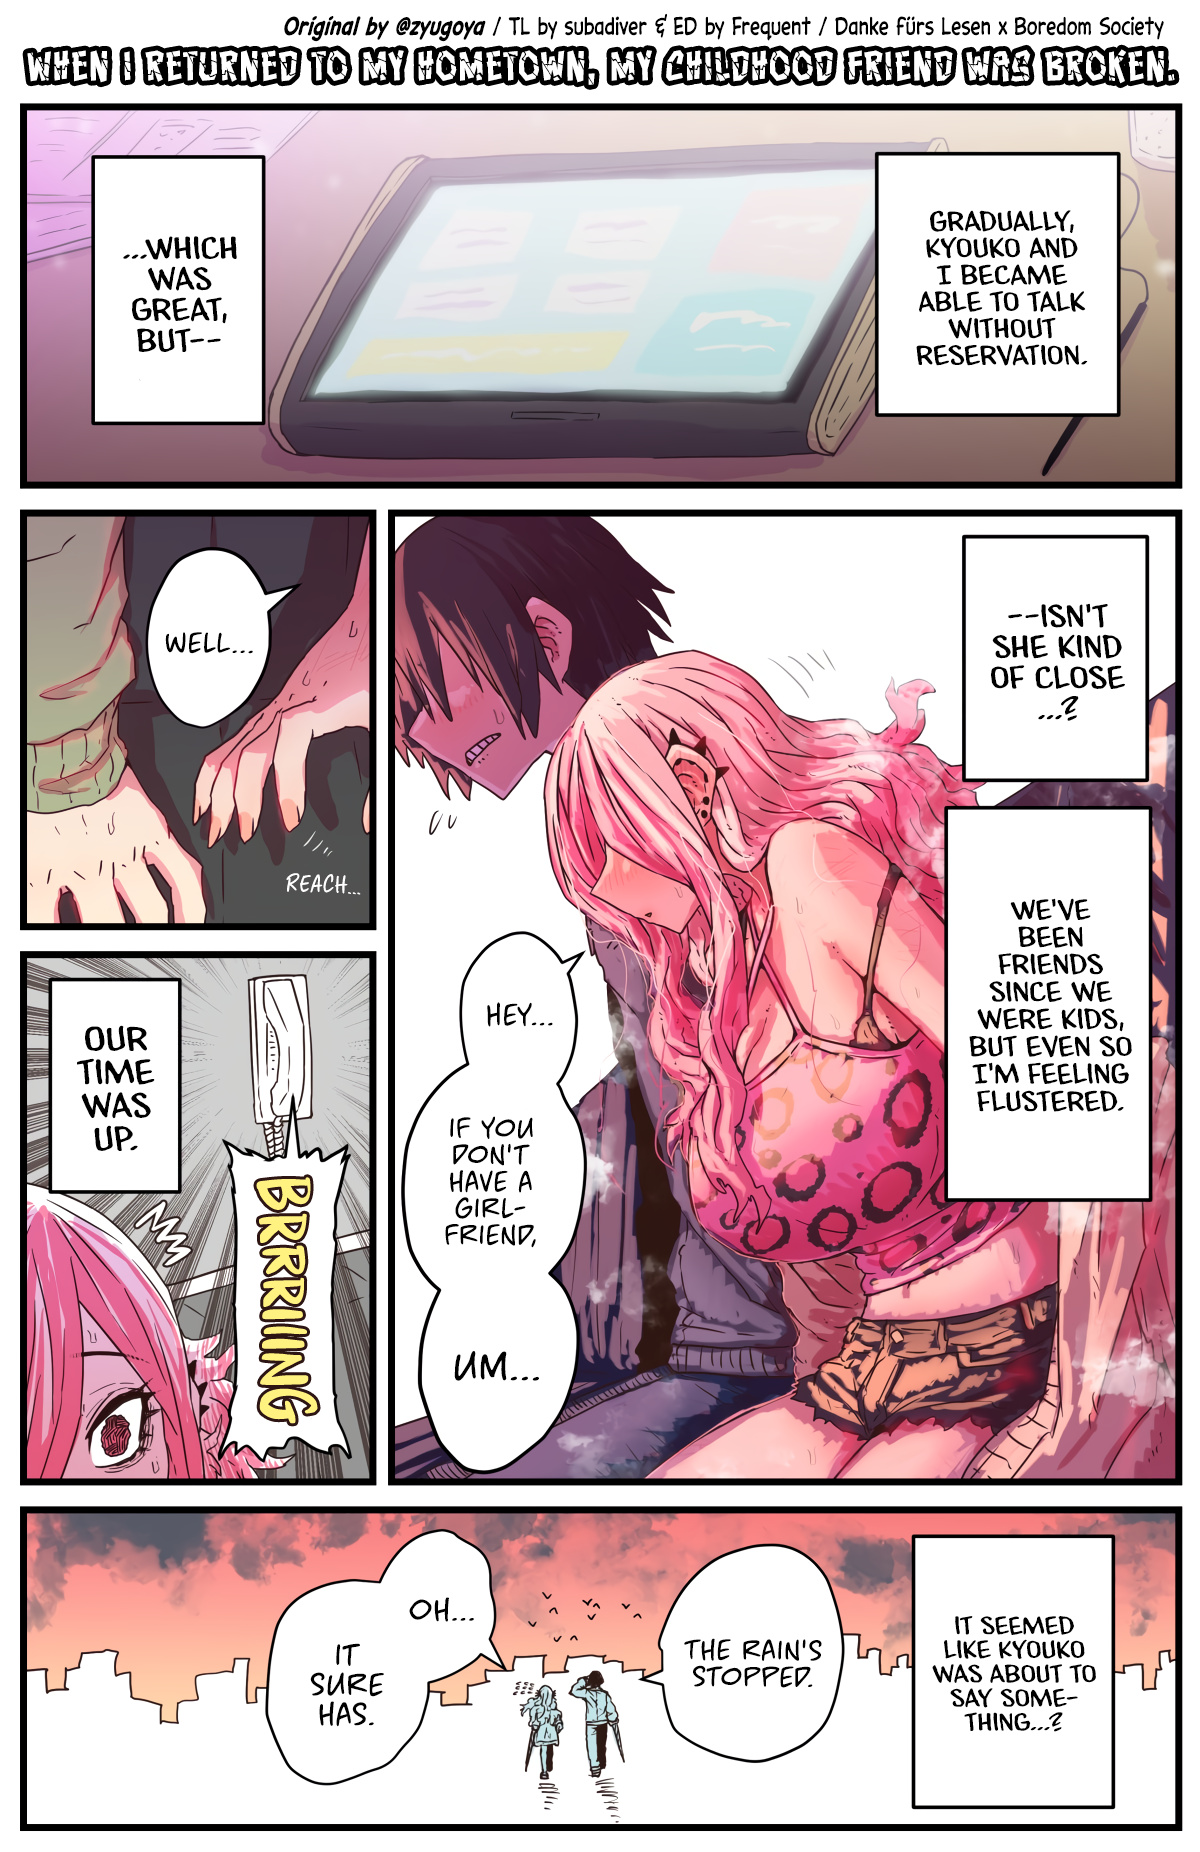 When I Returned To My Hometown, My Childhood Friend Was Broken - Page 1